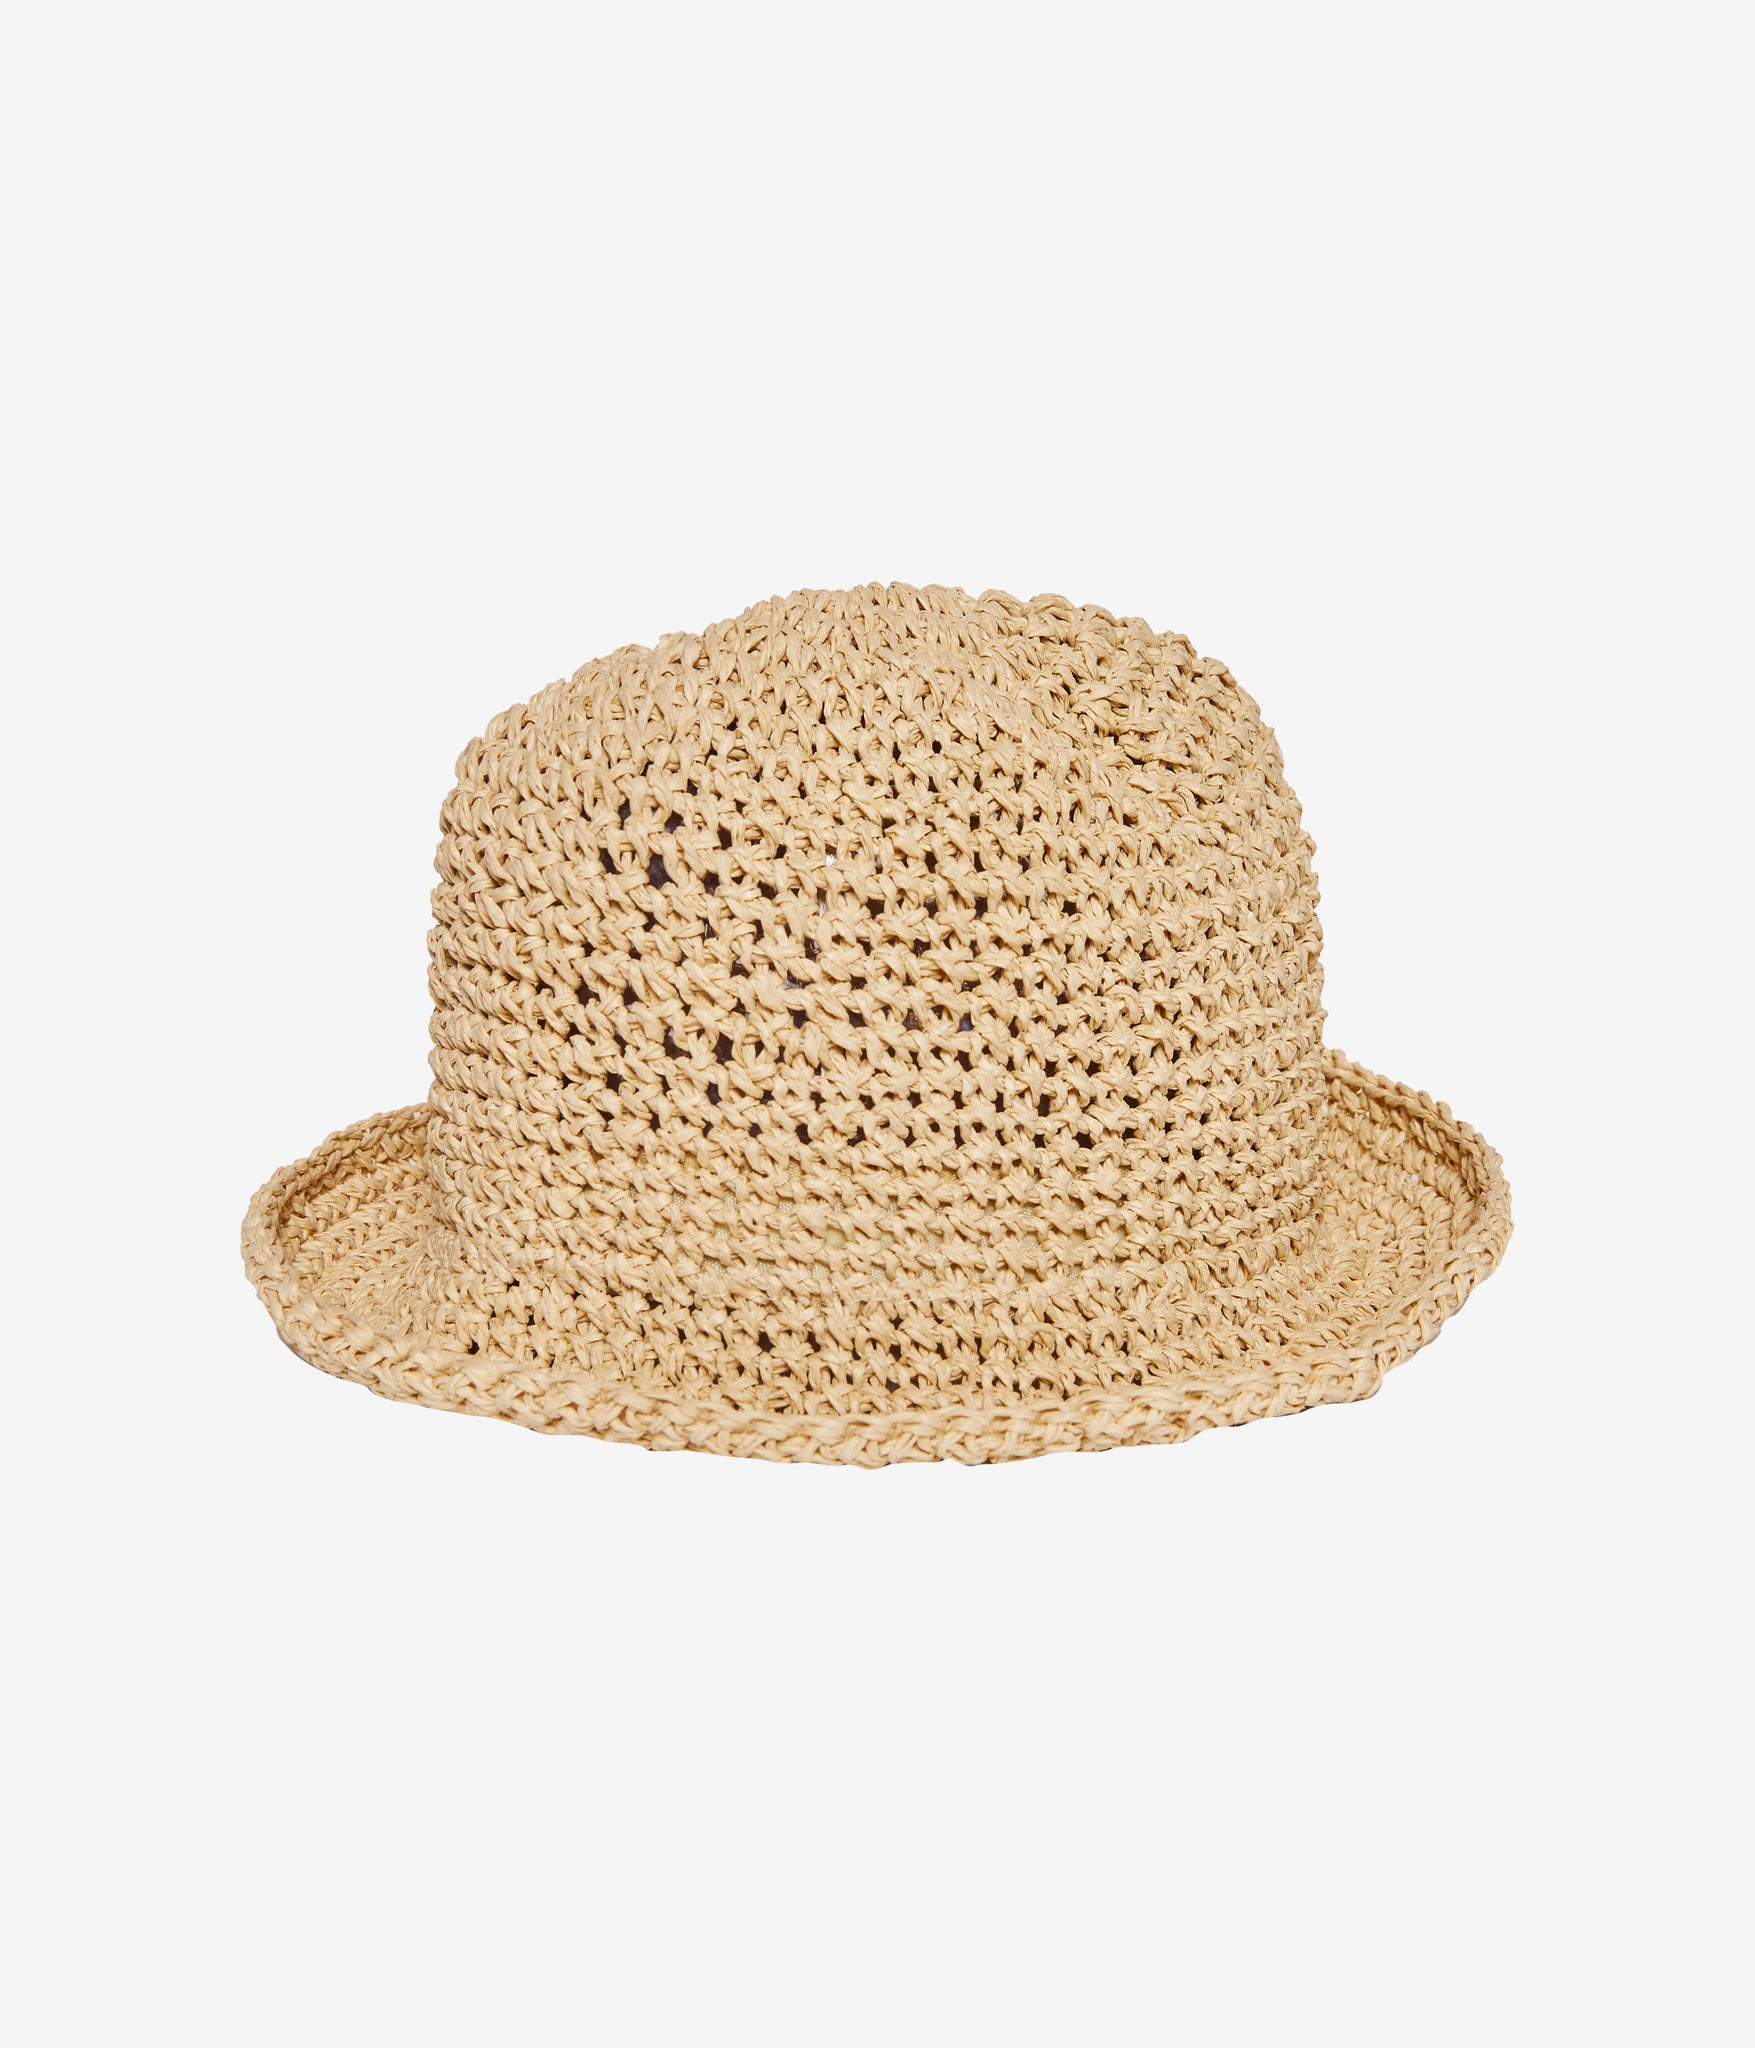 Lifeguard Classic Straw Hat for Kids and Babies⎟HEADSTER KIDS